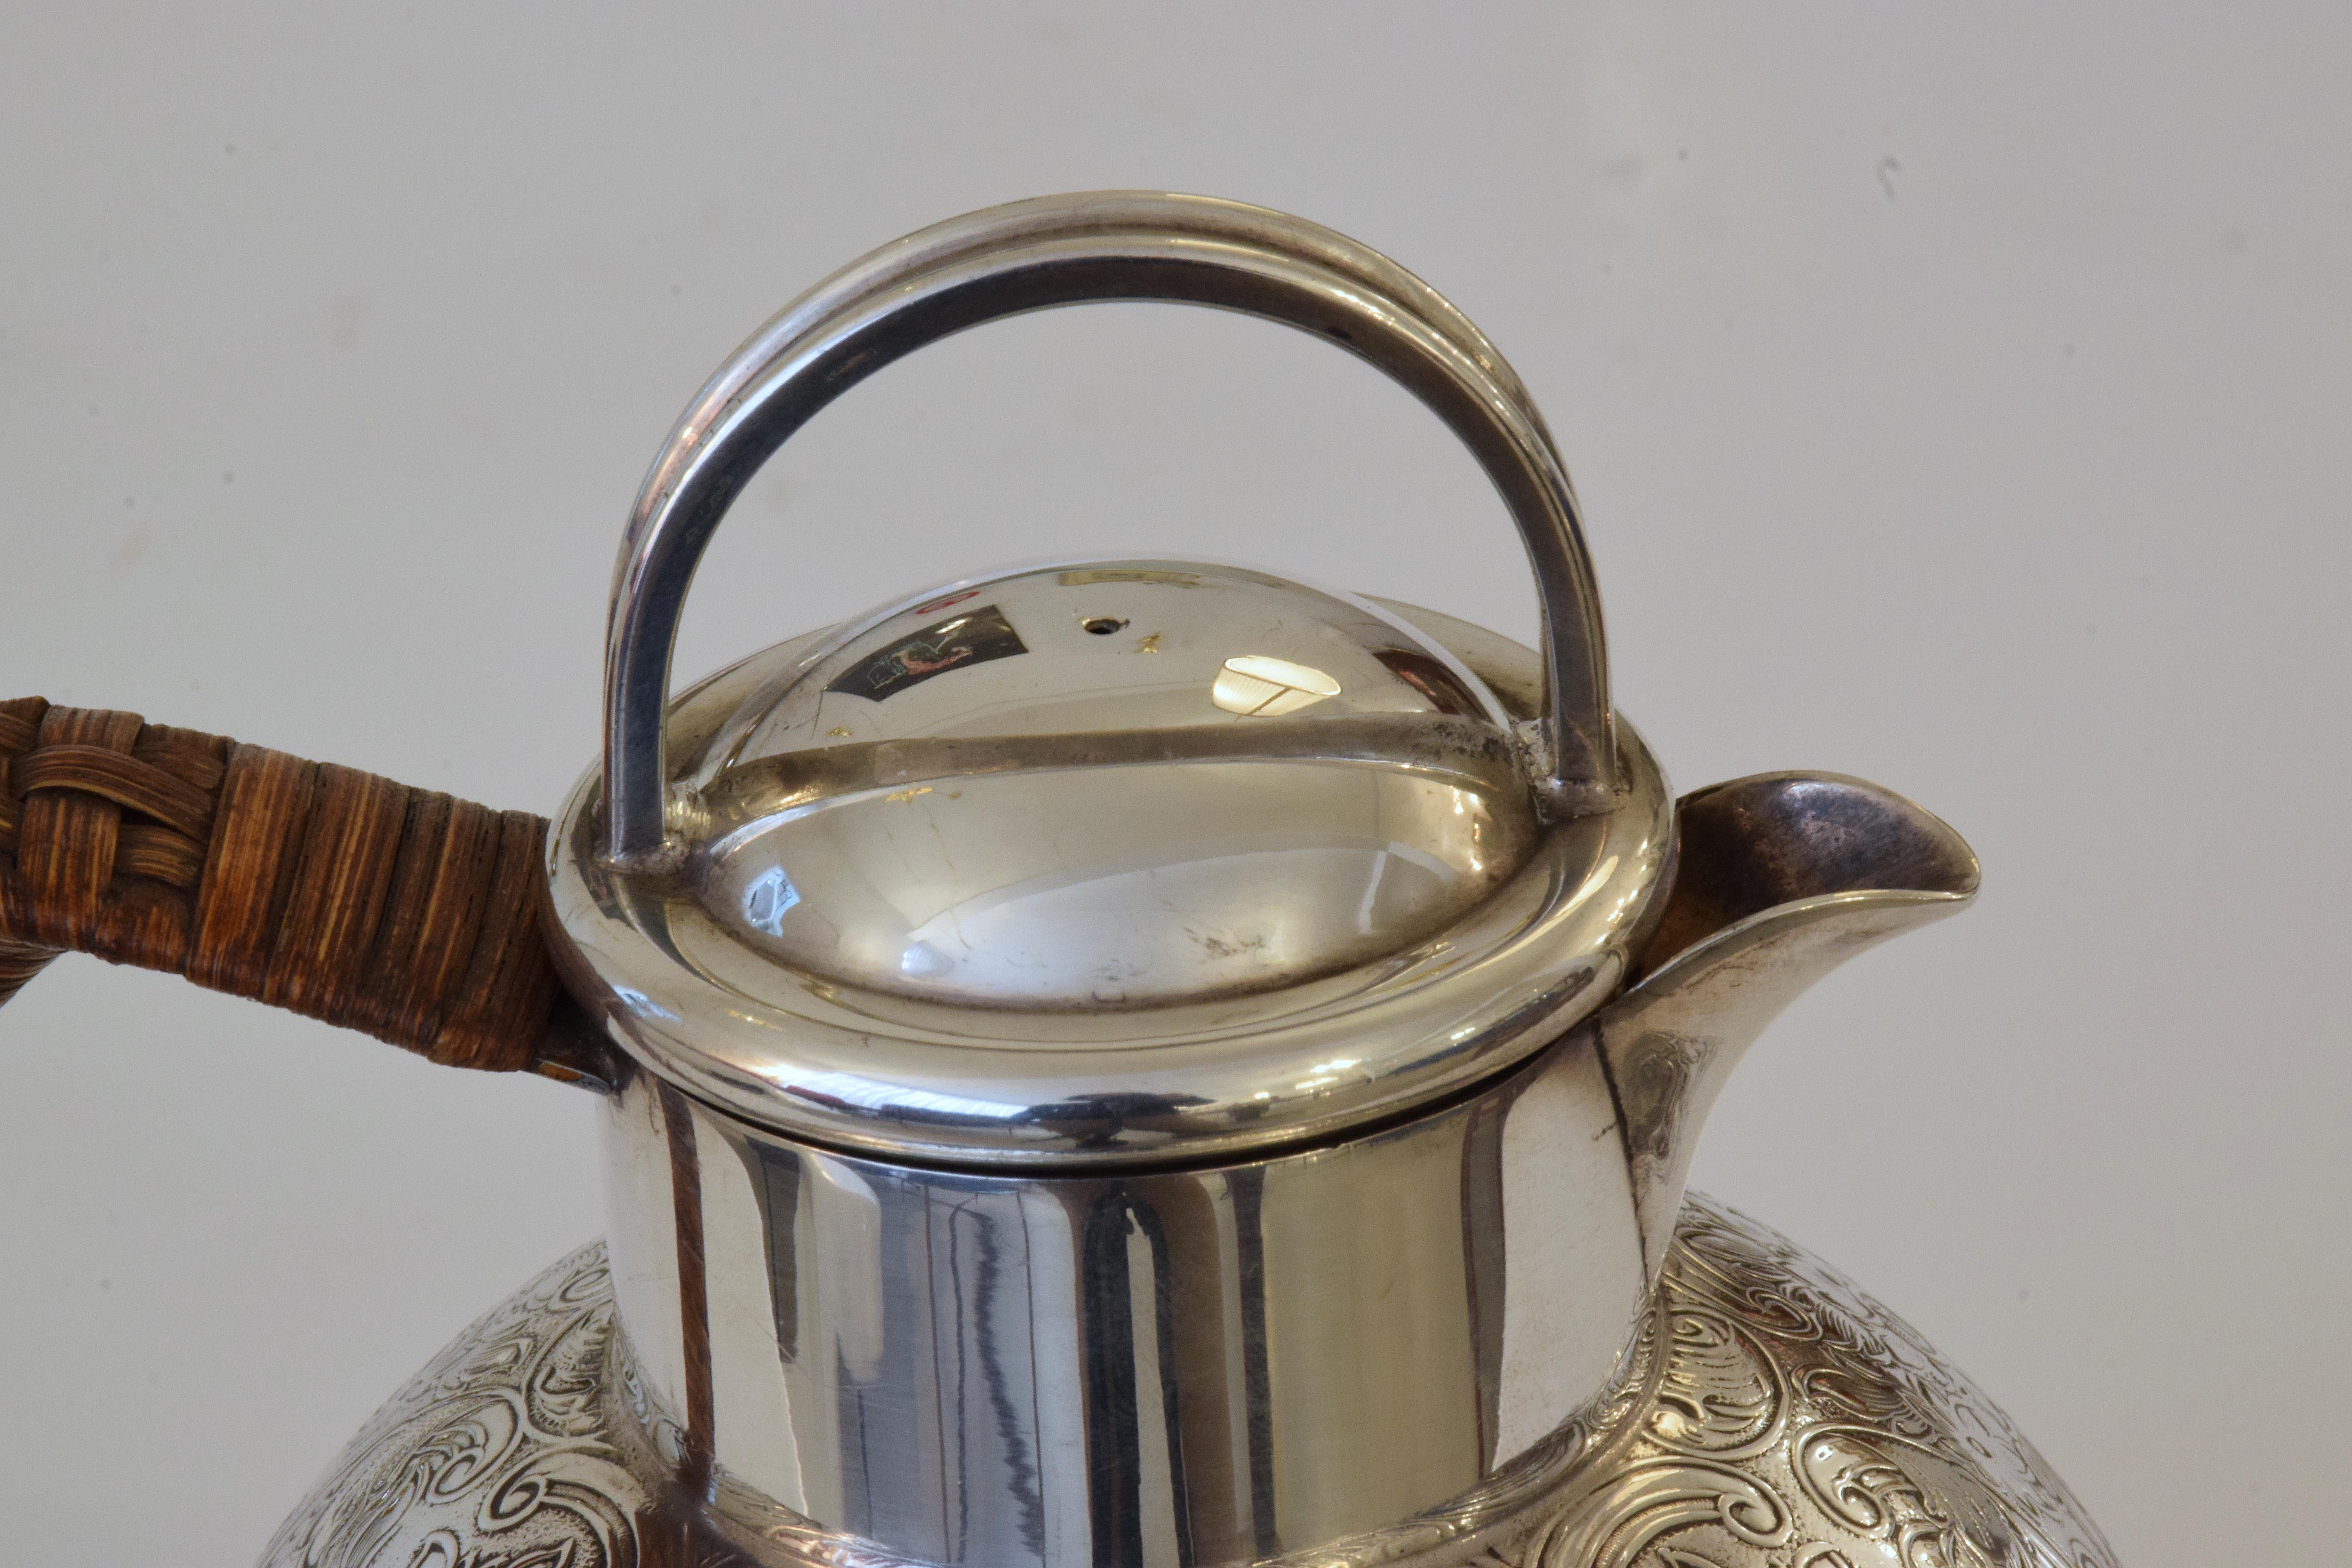 20th Century English Antique Small Silver Pitcher or Teapot by Bailey Banks & Biddle